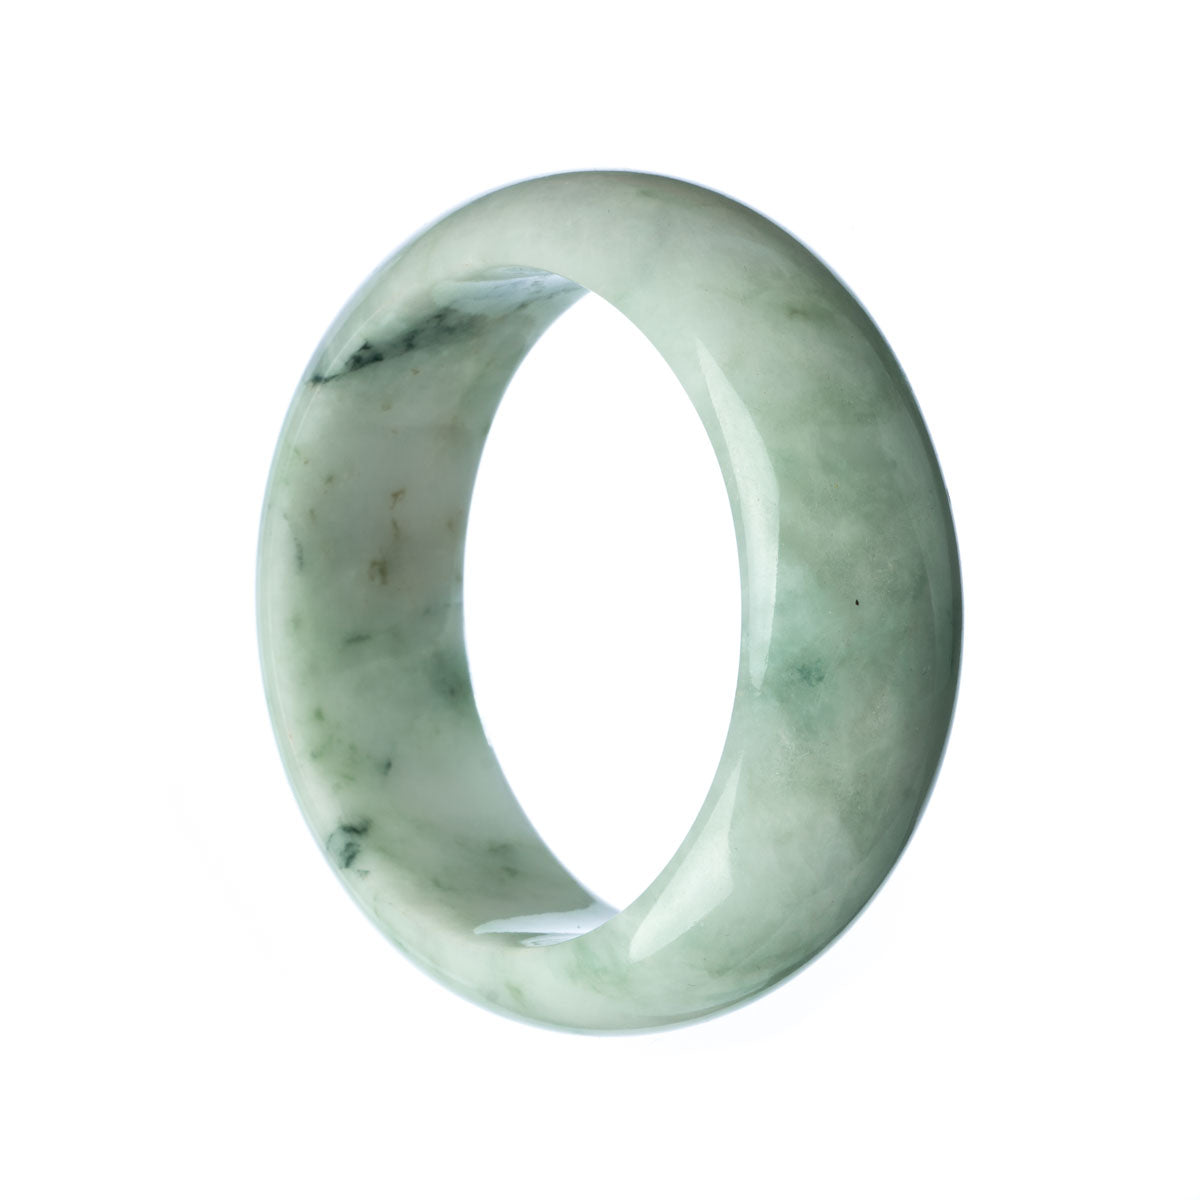 A close-up image of a pale green jade bangle bracelet, measuring 58mm in diameter. The bangle is made of high-quality Burma jade and has a flat design. It is a luxurious and elegant accessory.